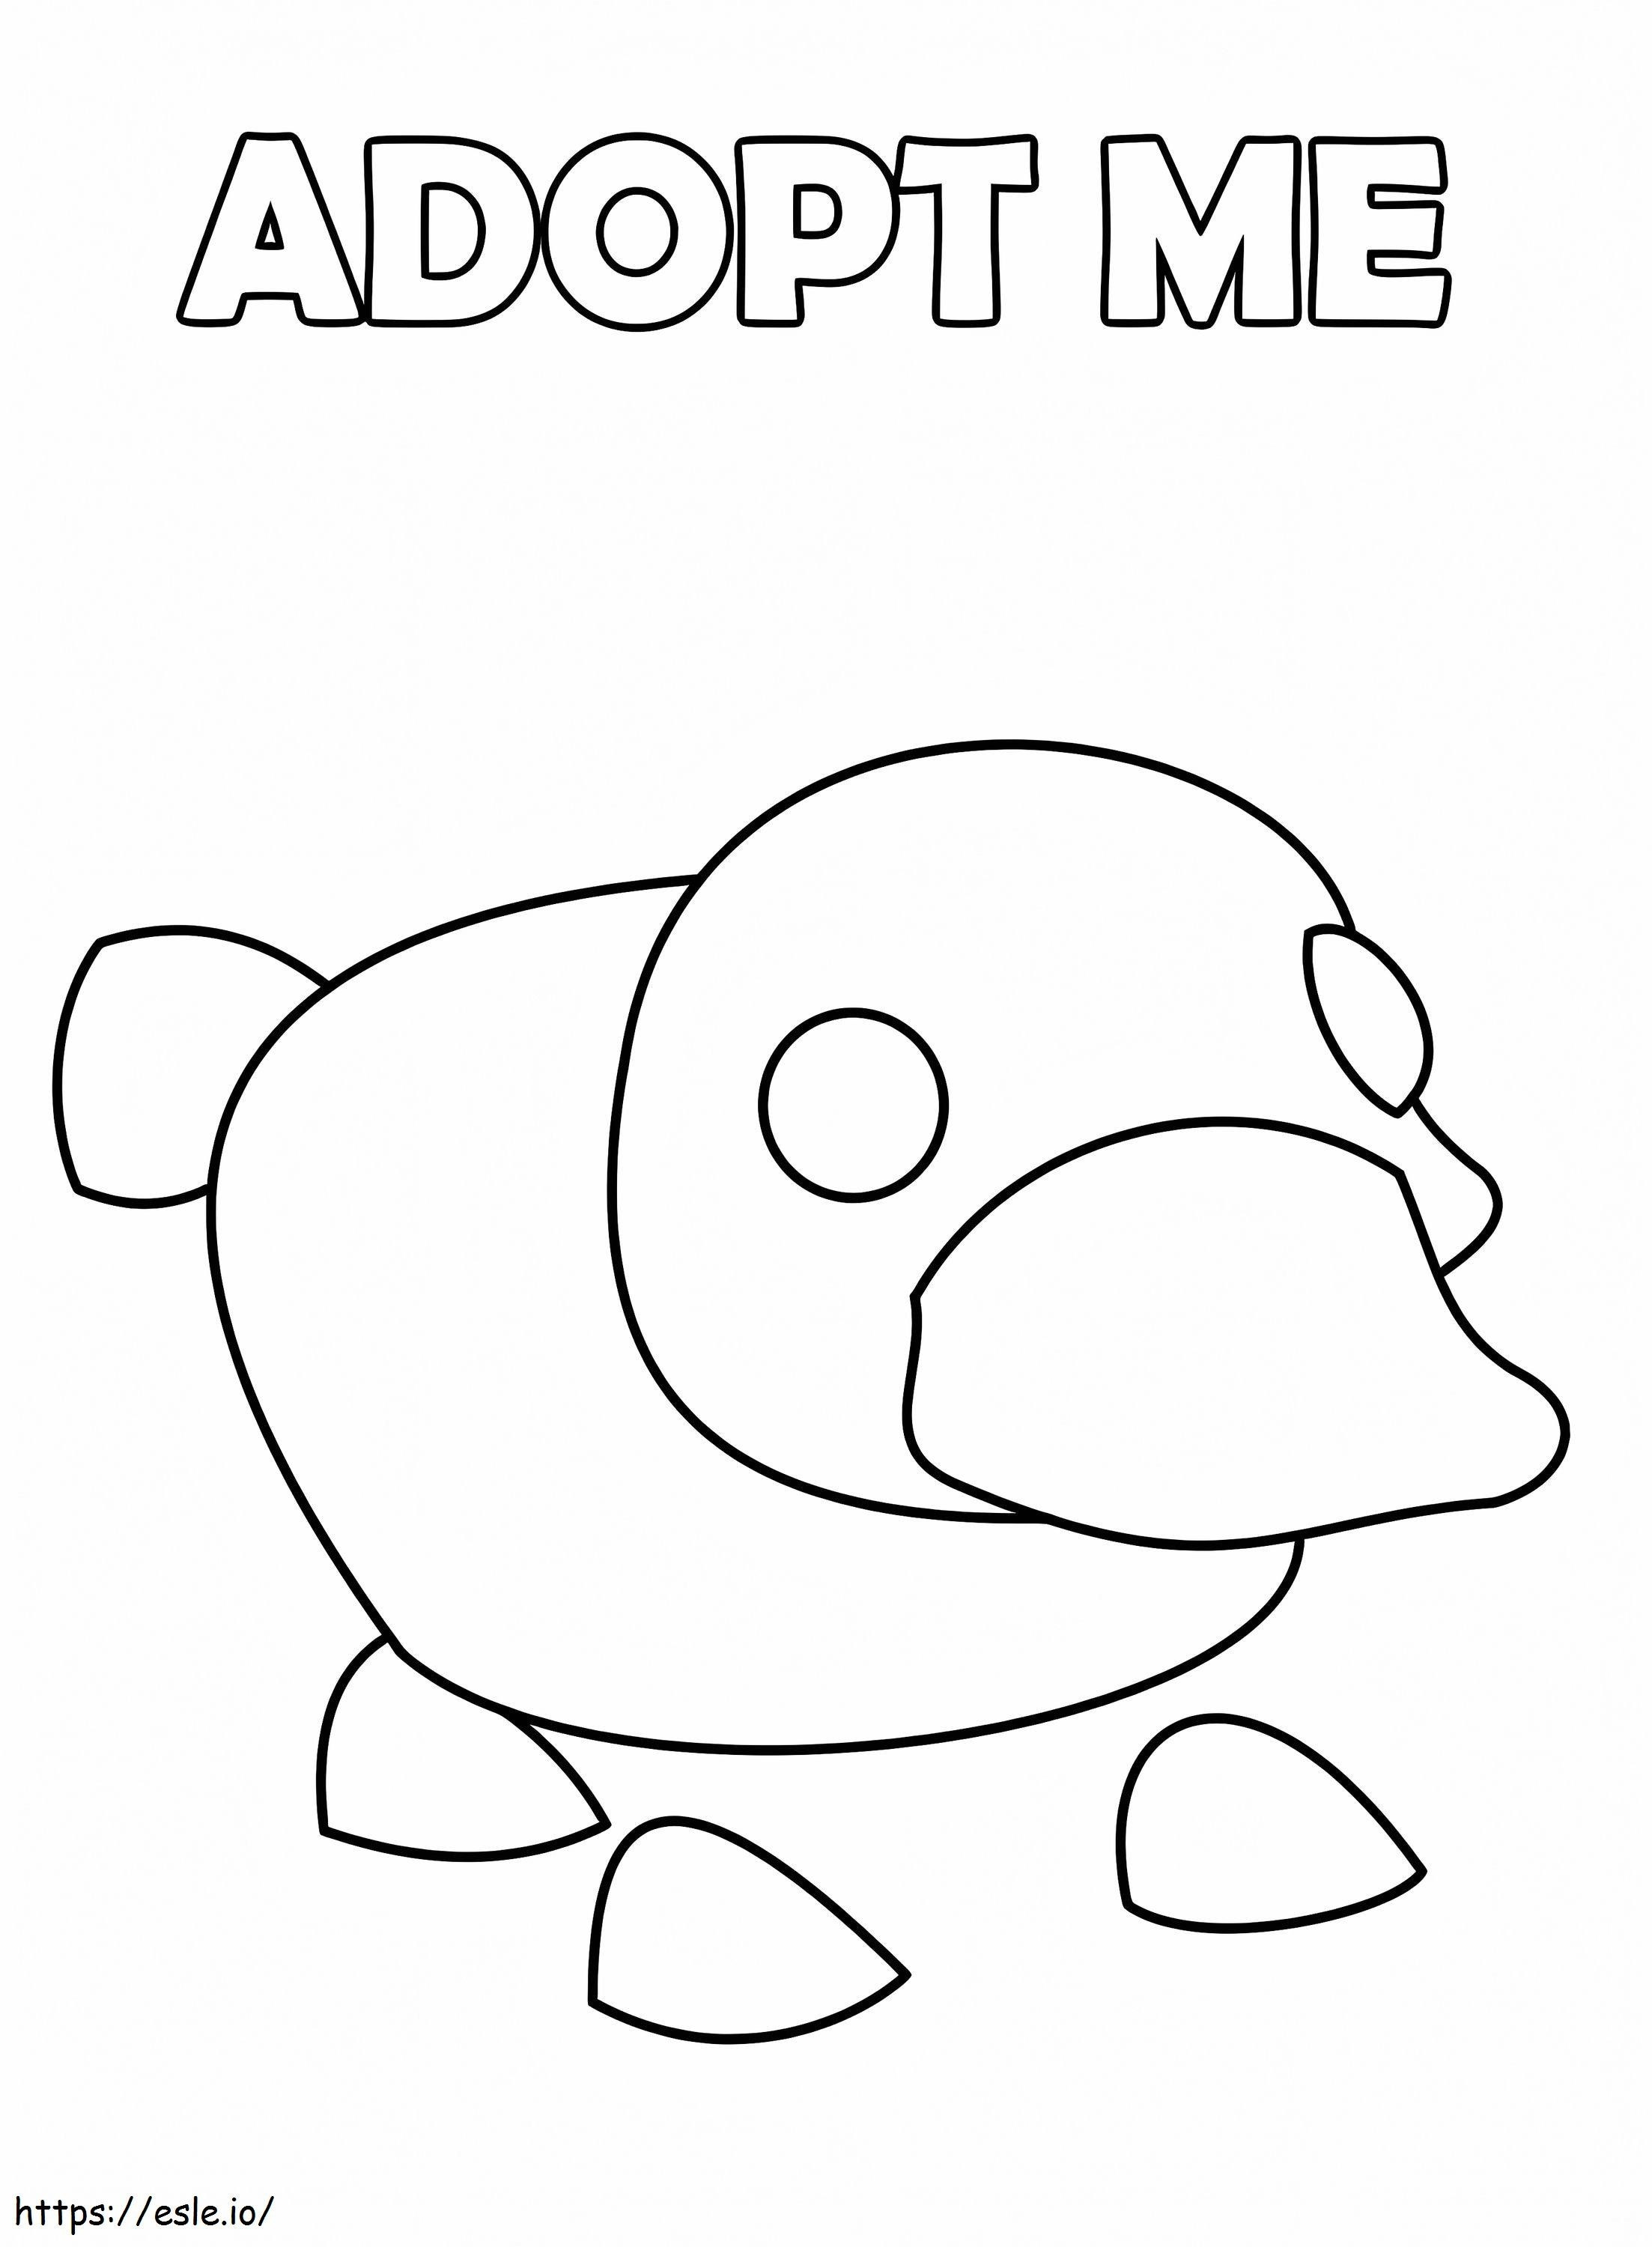 Platypus Adopt Me coloring page